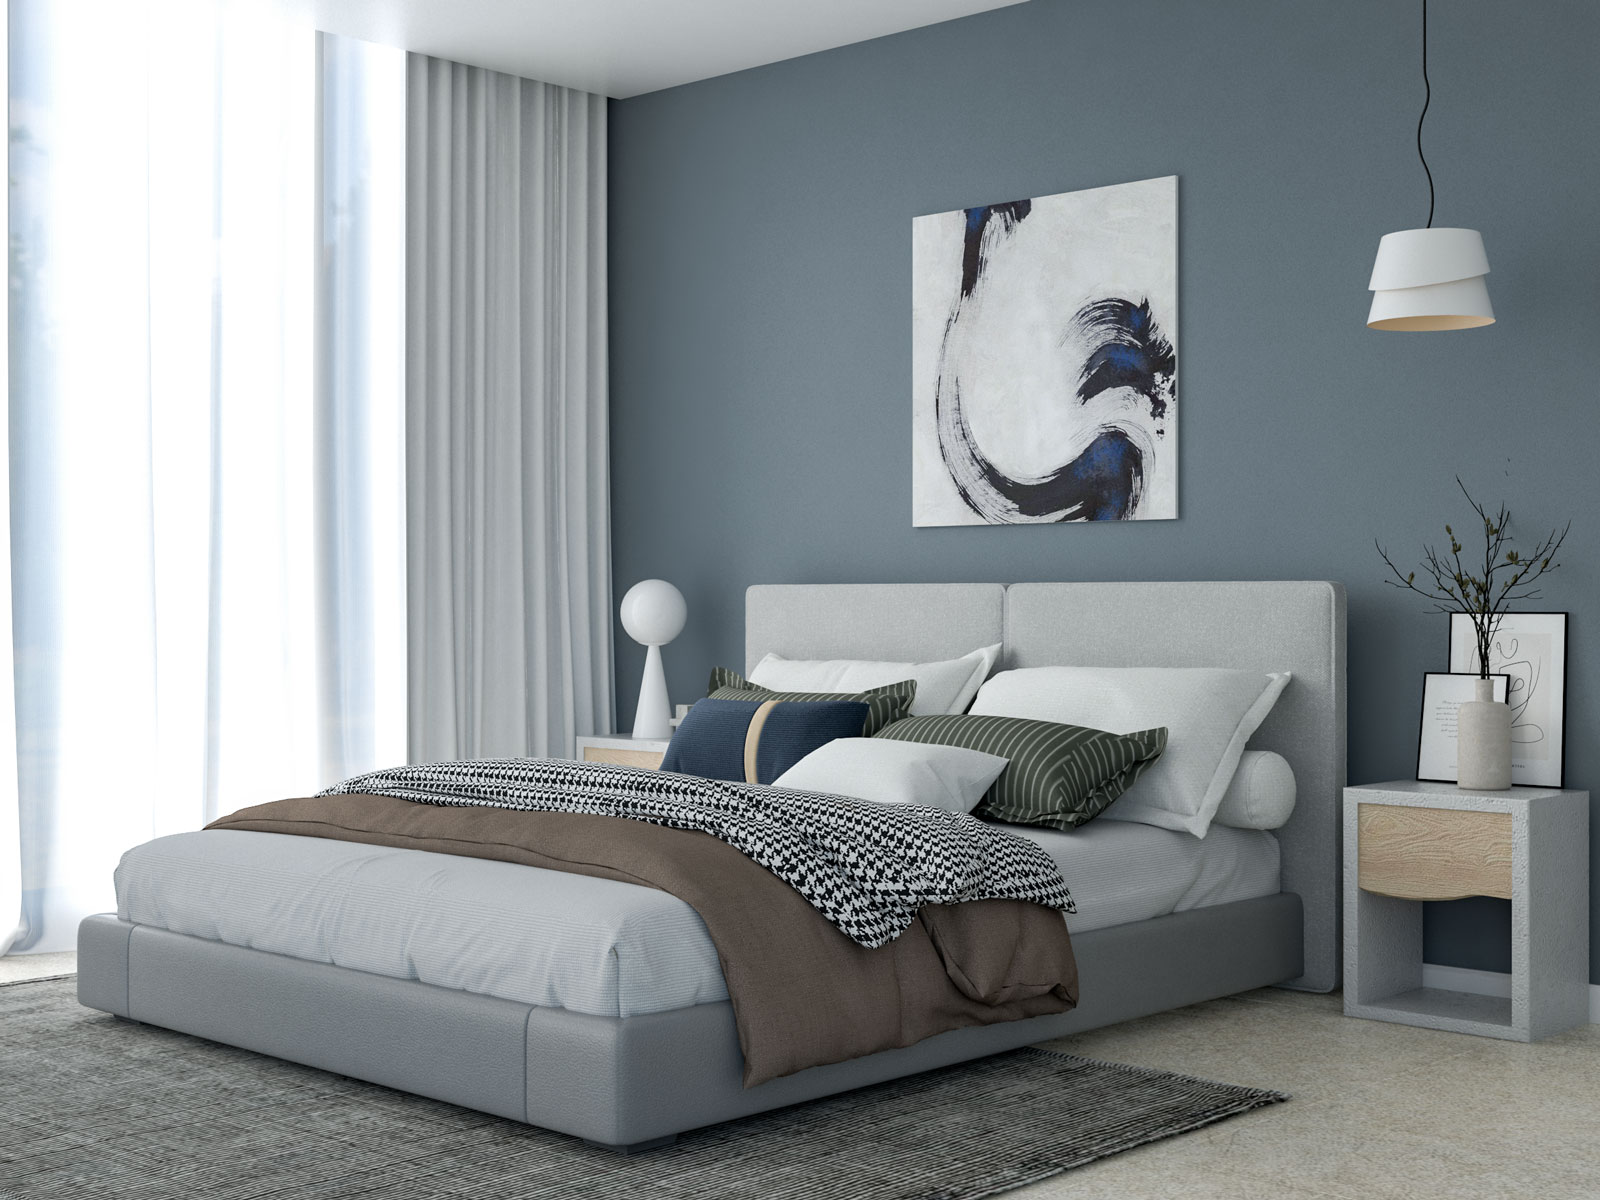 Modern Gray Bedroom with Navy Accents 